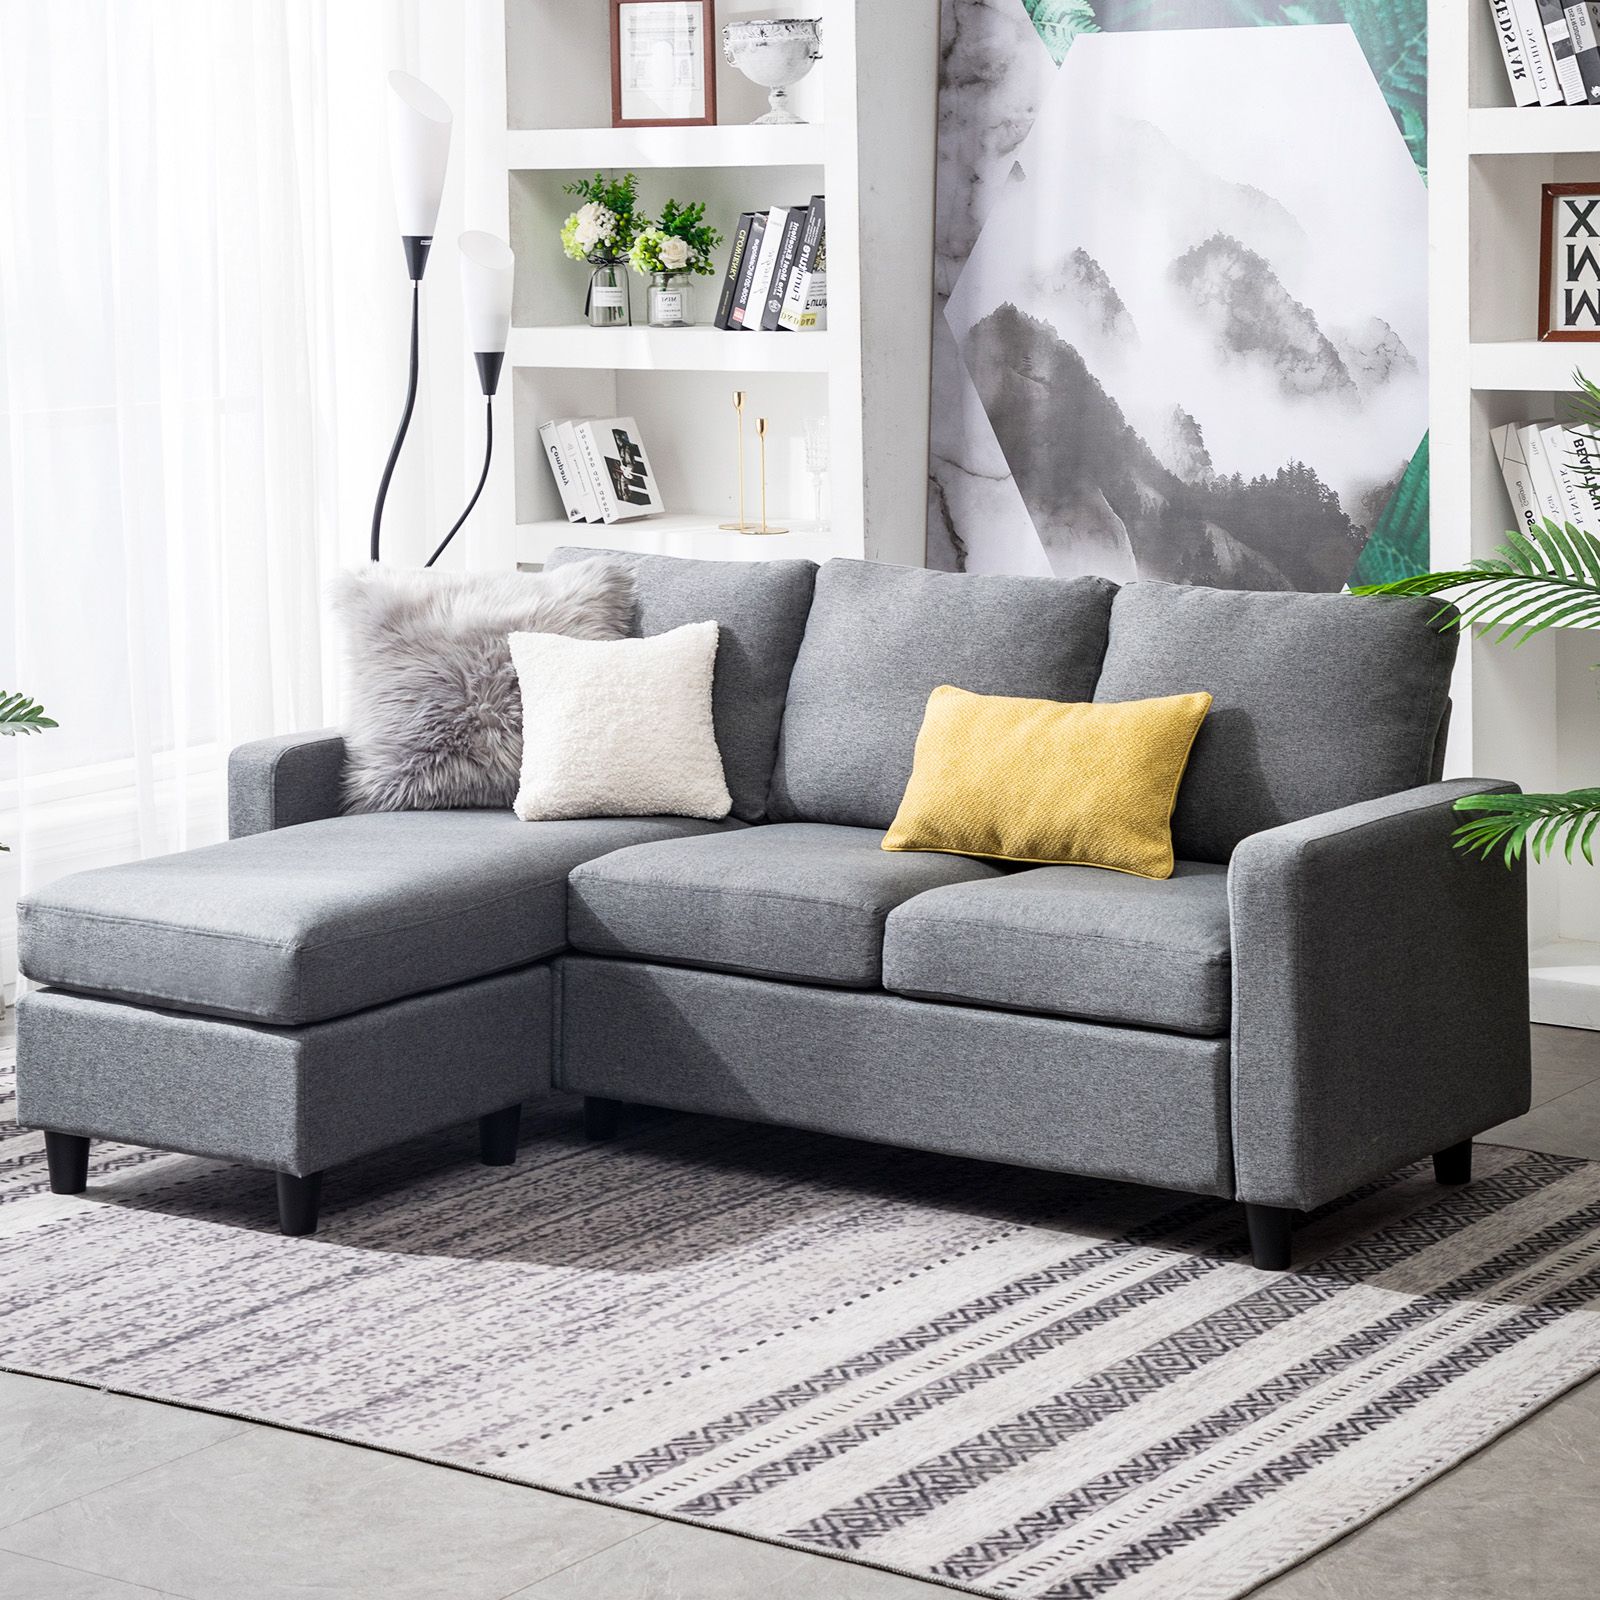 L Shape Couches With Reversible Chaises Throughout Well Known Grey Sectional Sofa L Shaped Couch W/reversible Chaise For Small Space (View 5 of 15)